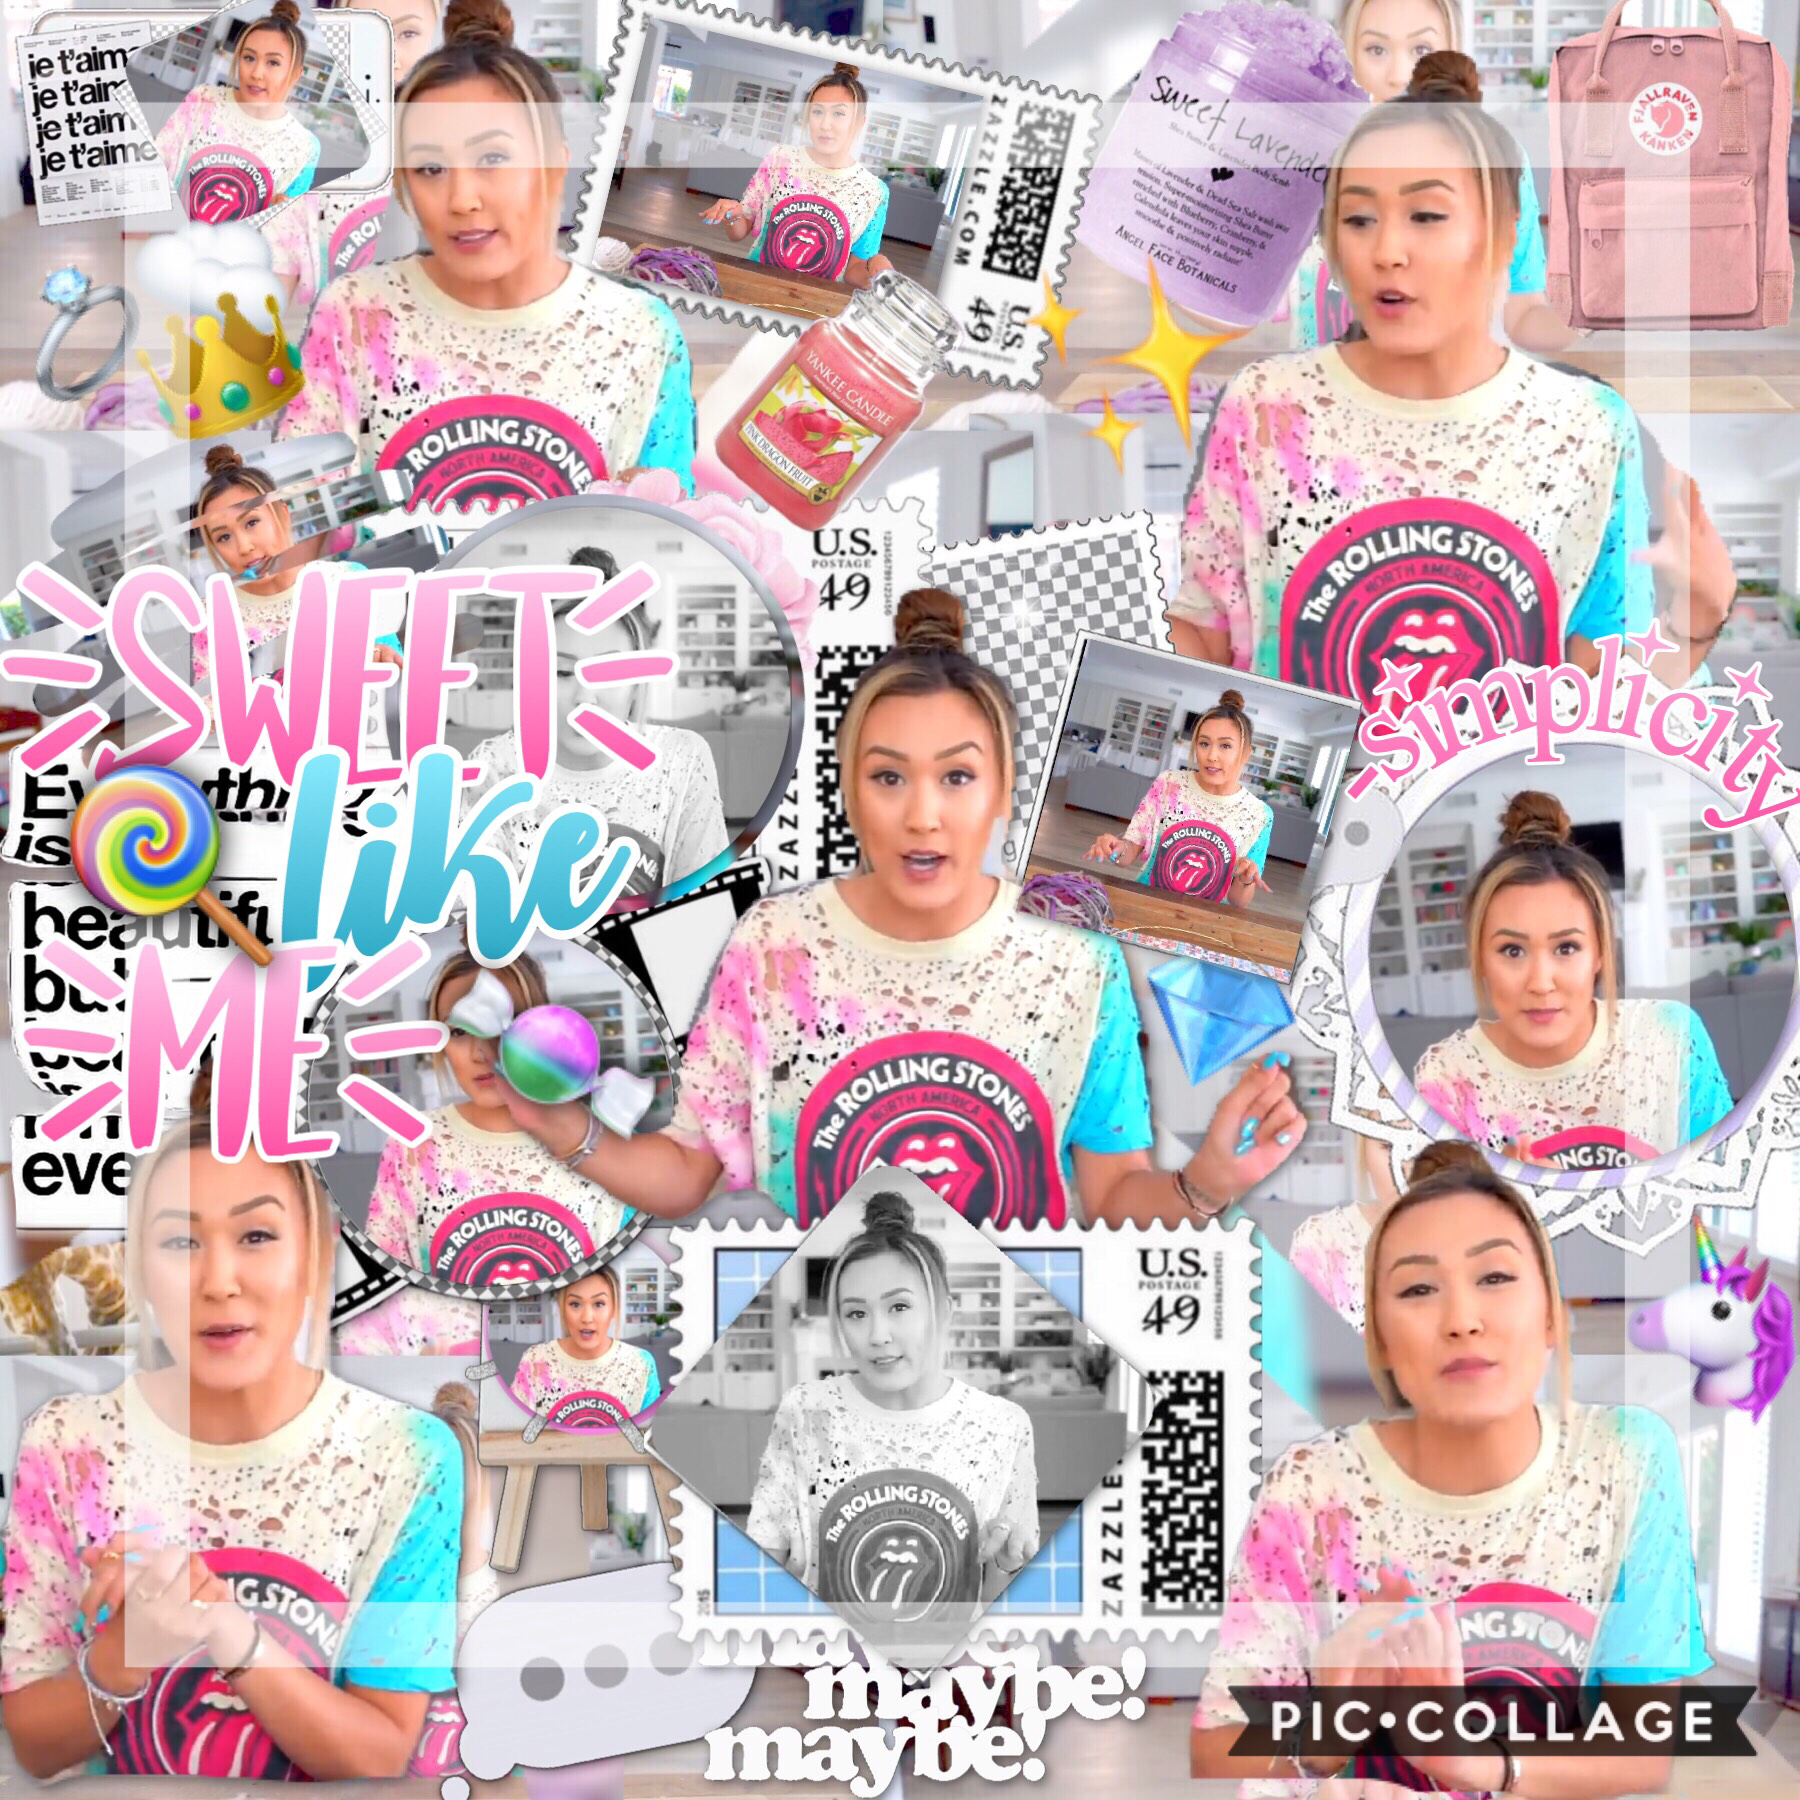 TAP
Yet again another laurdiy collage🤣 she’s just sooo AMAZING!!!! Anyway... Deleting my old collages again🤦🏻‍♀️ Stay tuned for some collabs later on!!!
Love you guys!!!!